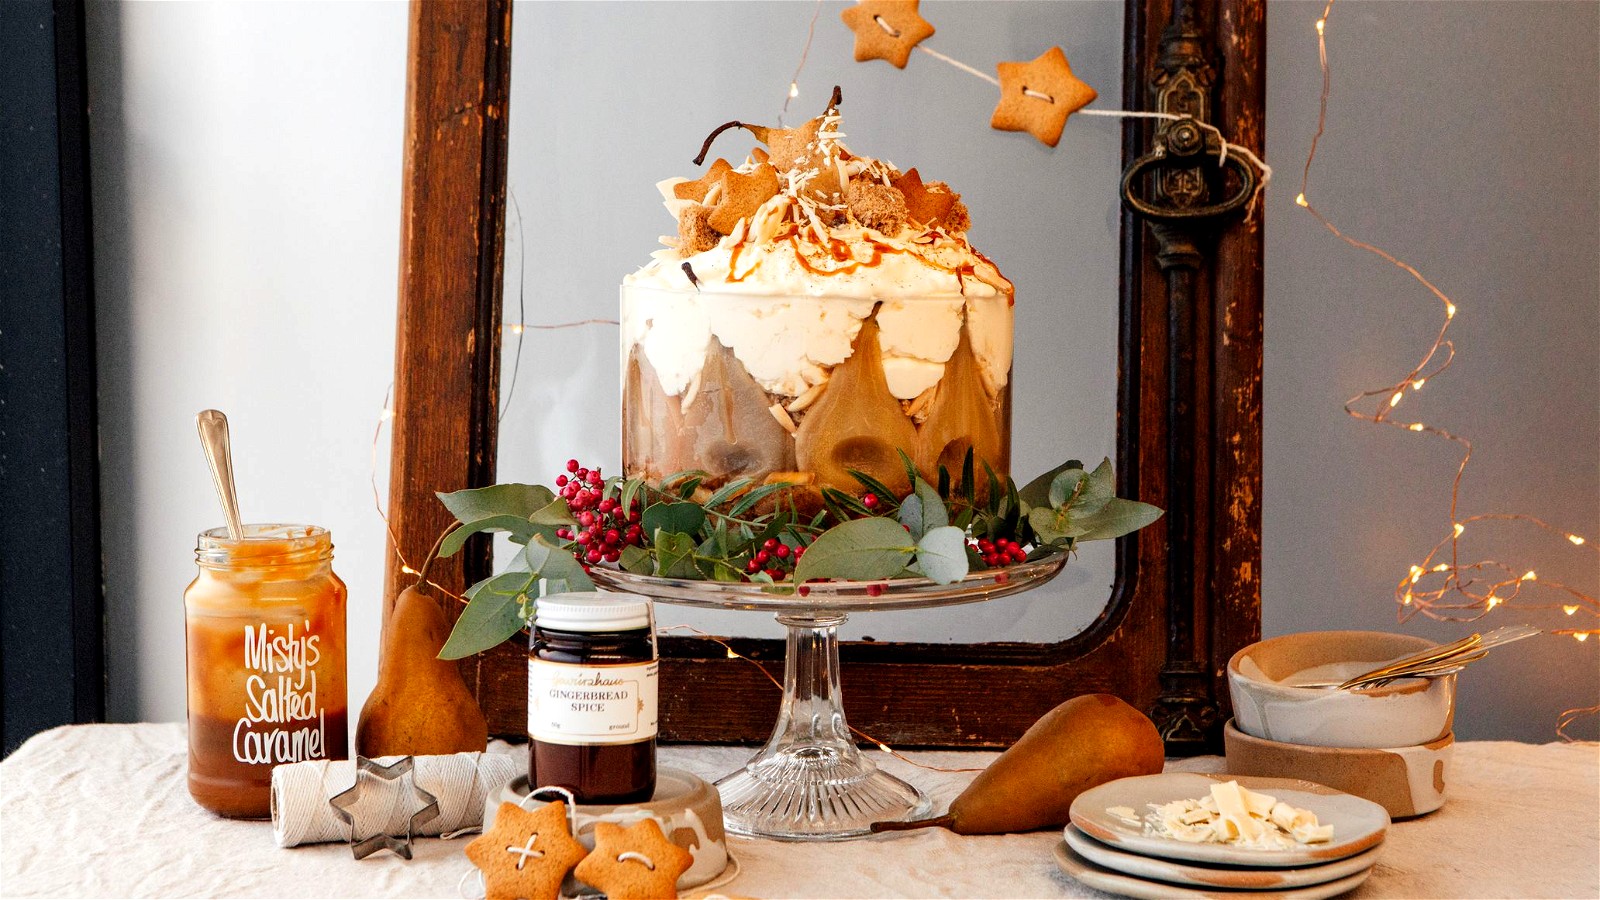 Image of Gingerbread Spiced Trifle with Poached Pears & Gingerbread Caramel